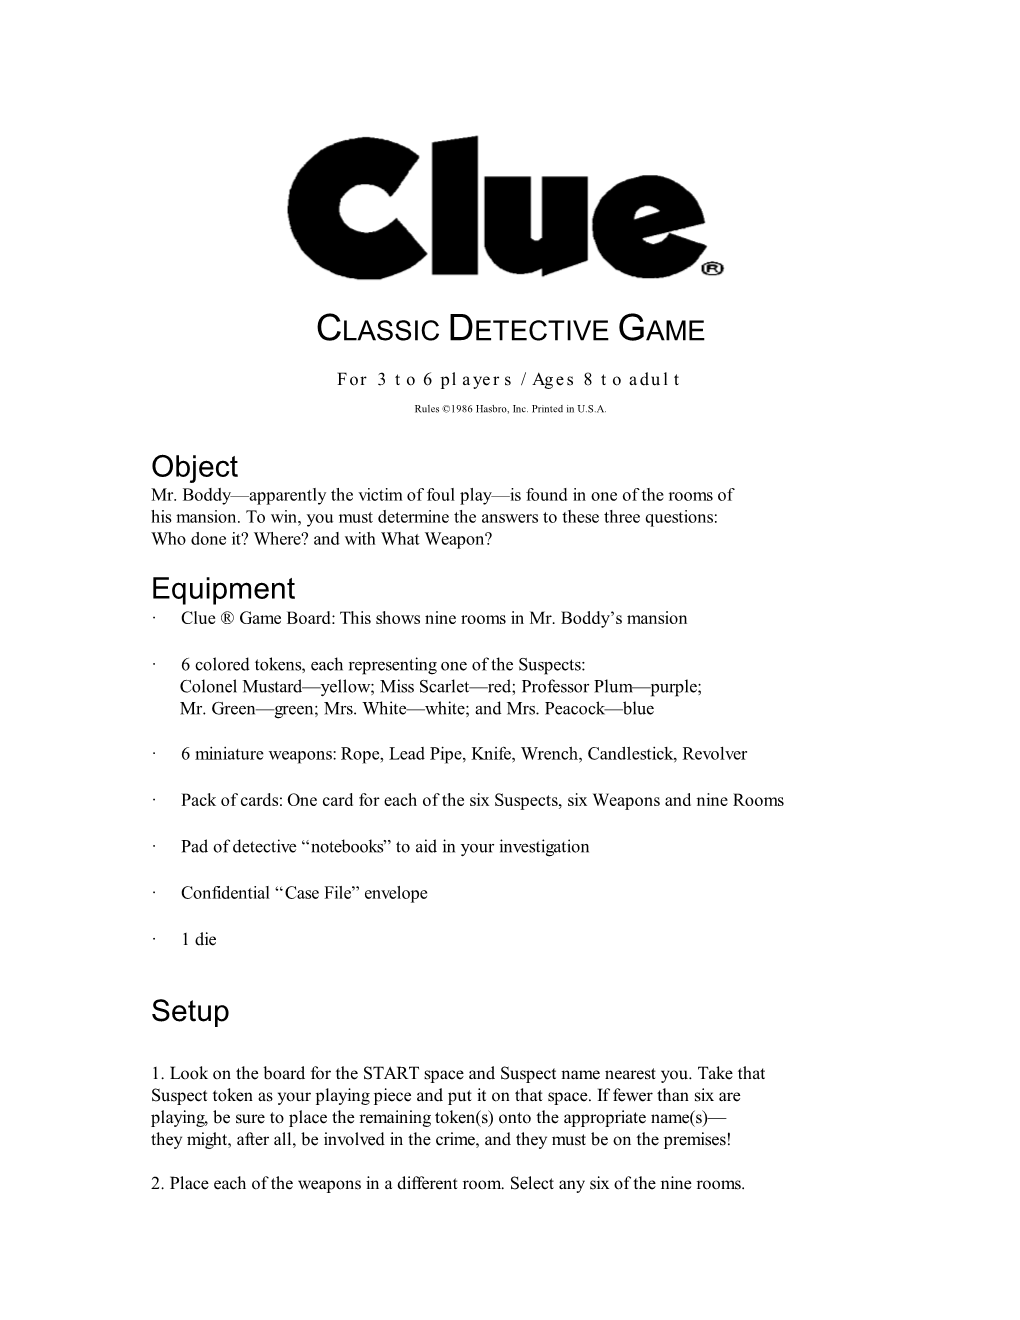 Game of Clue